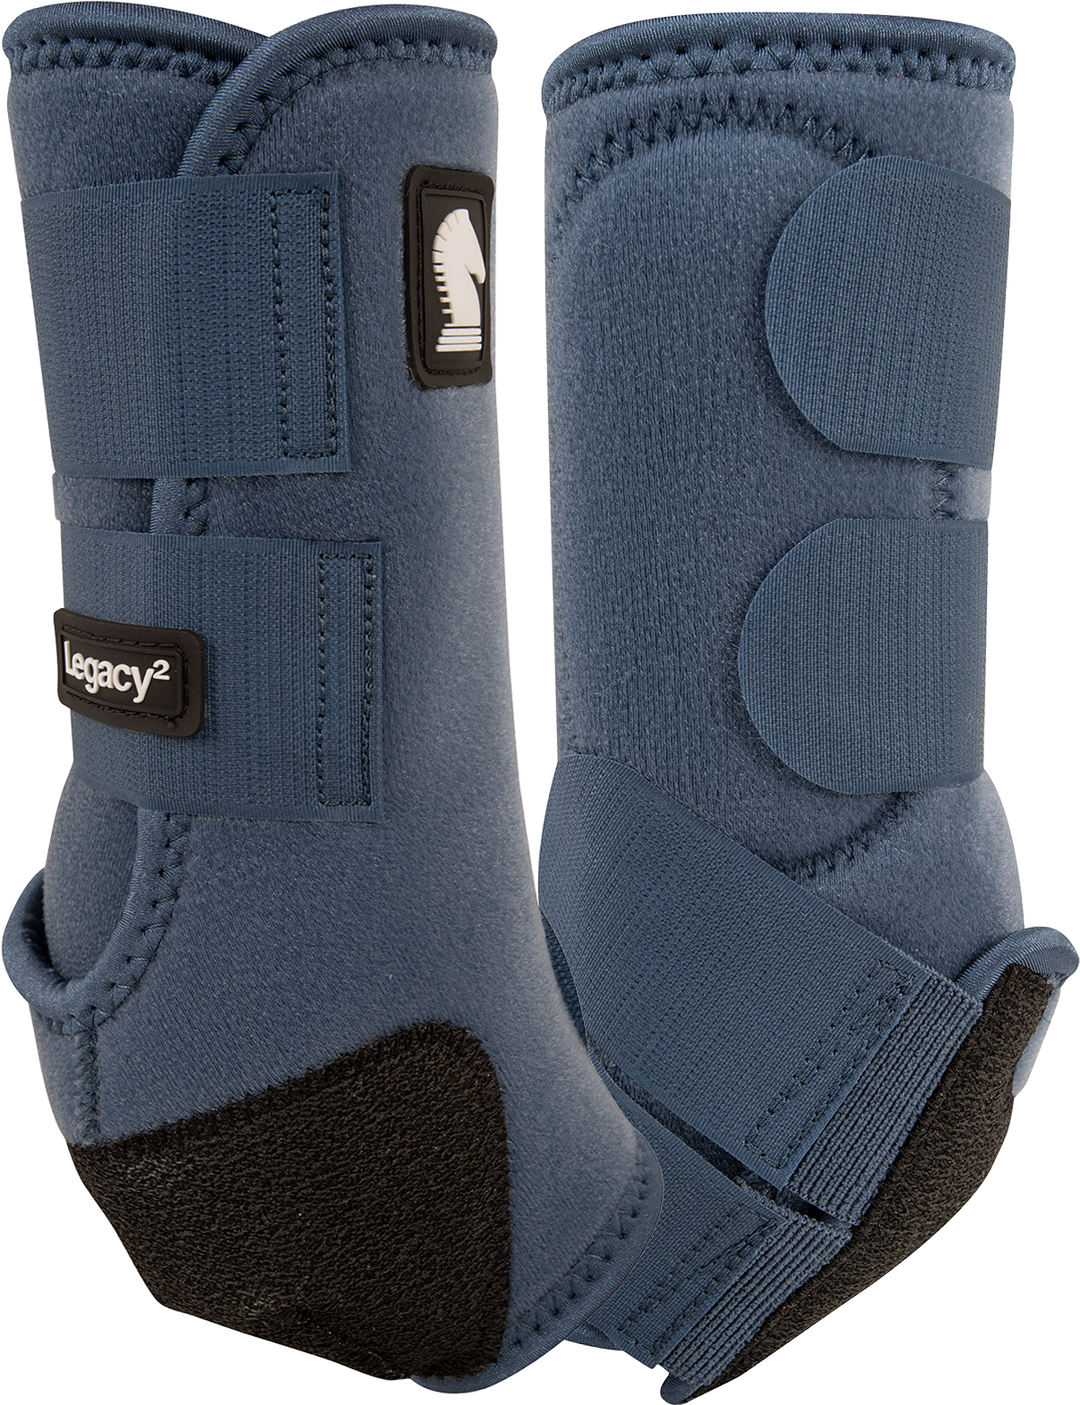 Classic Equine Legacy2 System-Denim Front